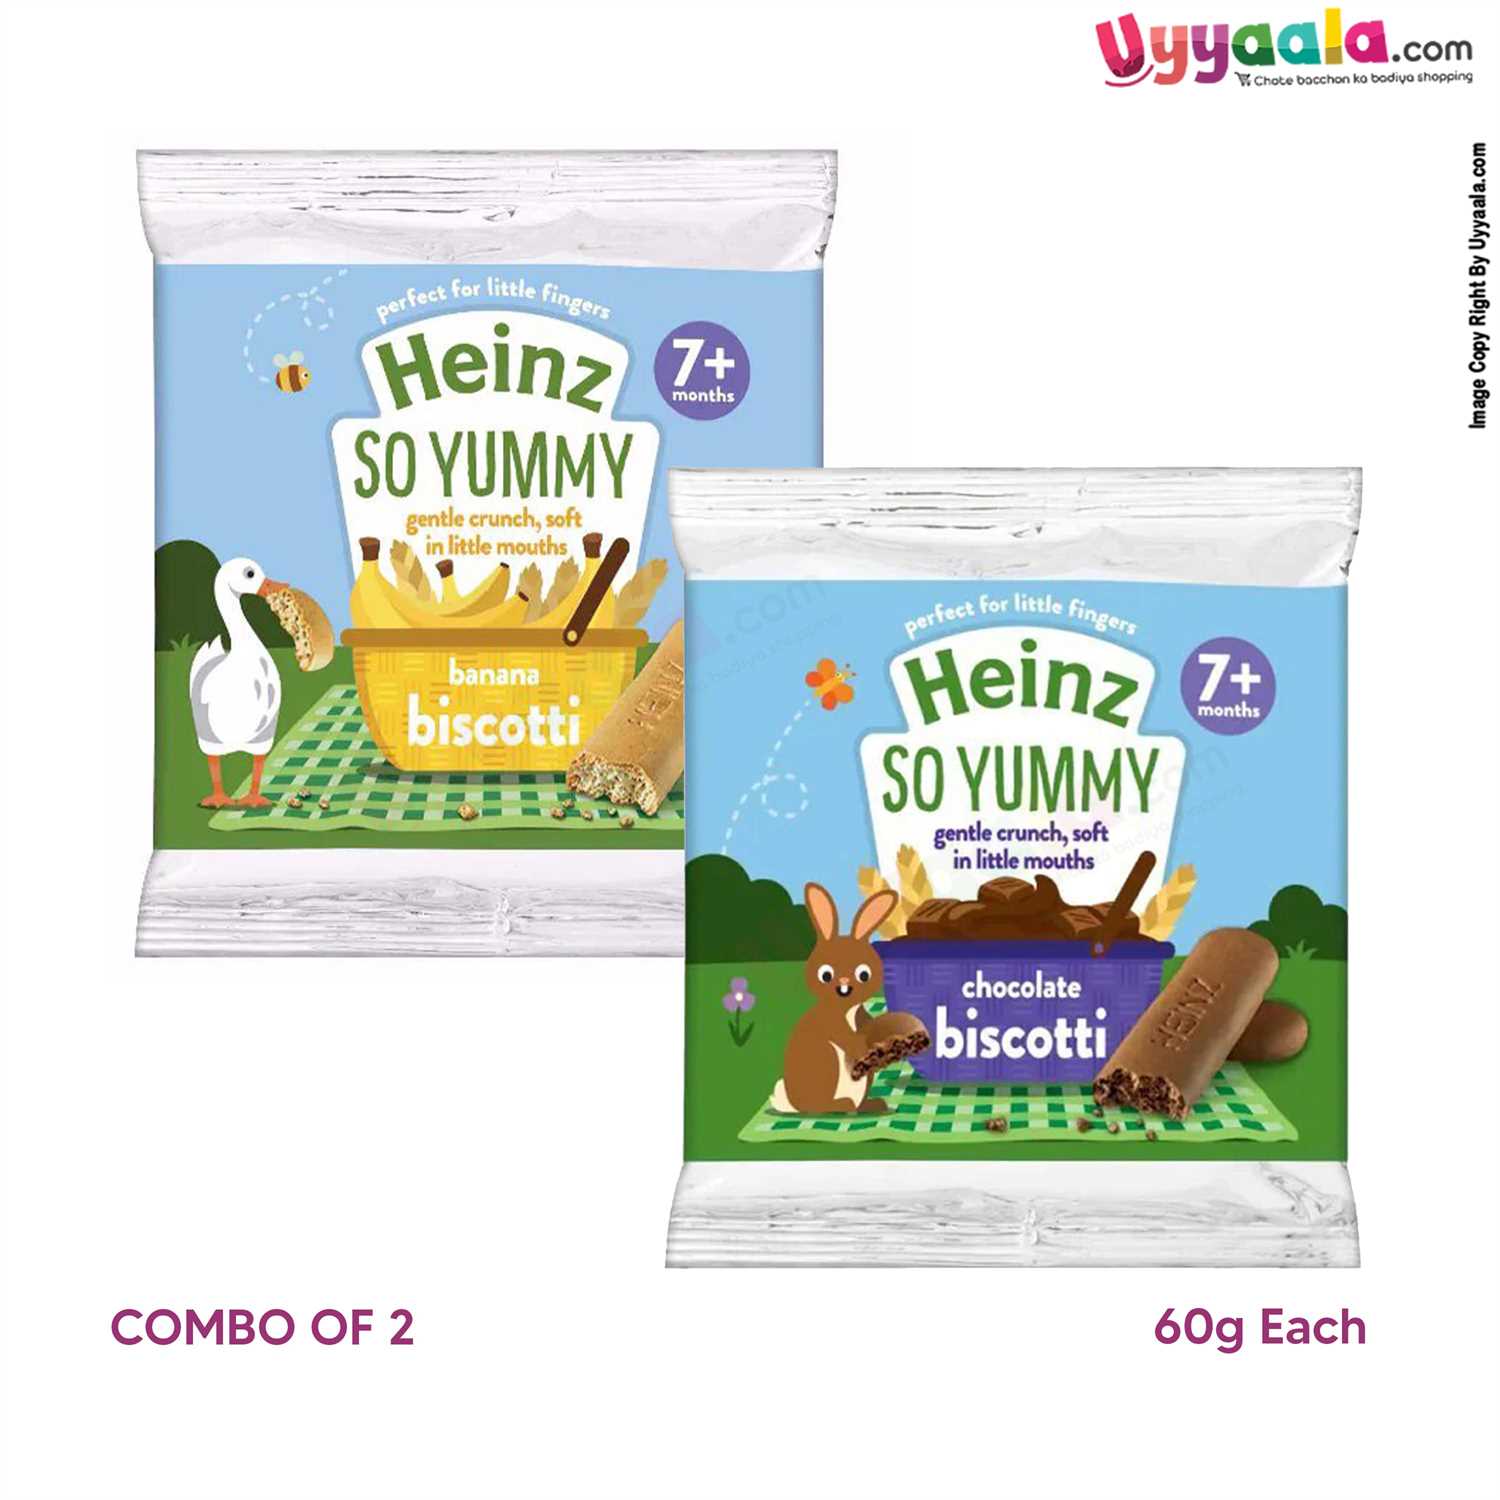 HEINZ SO YUMMY Banana & Chocolate biscotti for Kids snacks Combo of 2 - Banana & Chocolate Biscuits (60 g each), 7months+